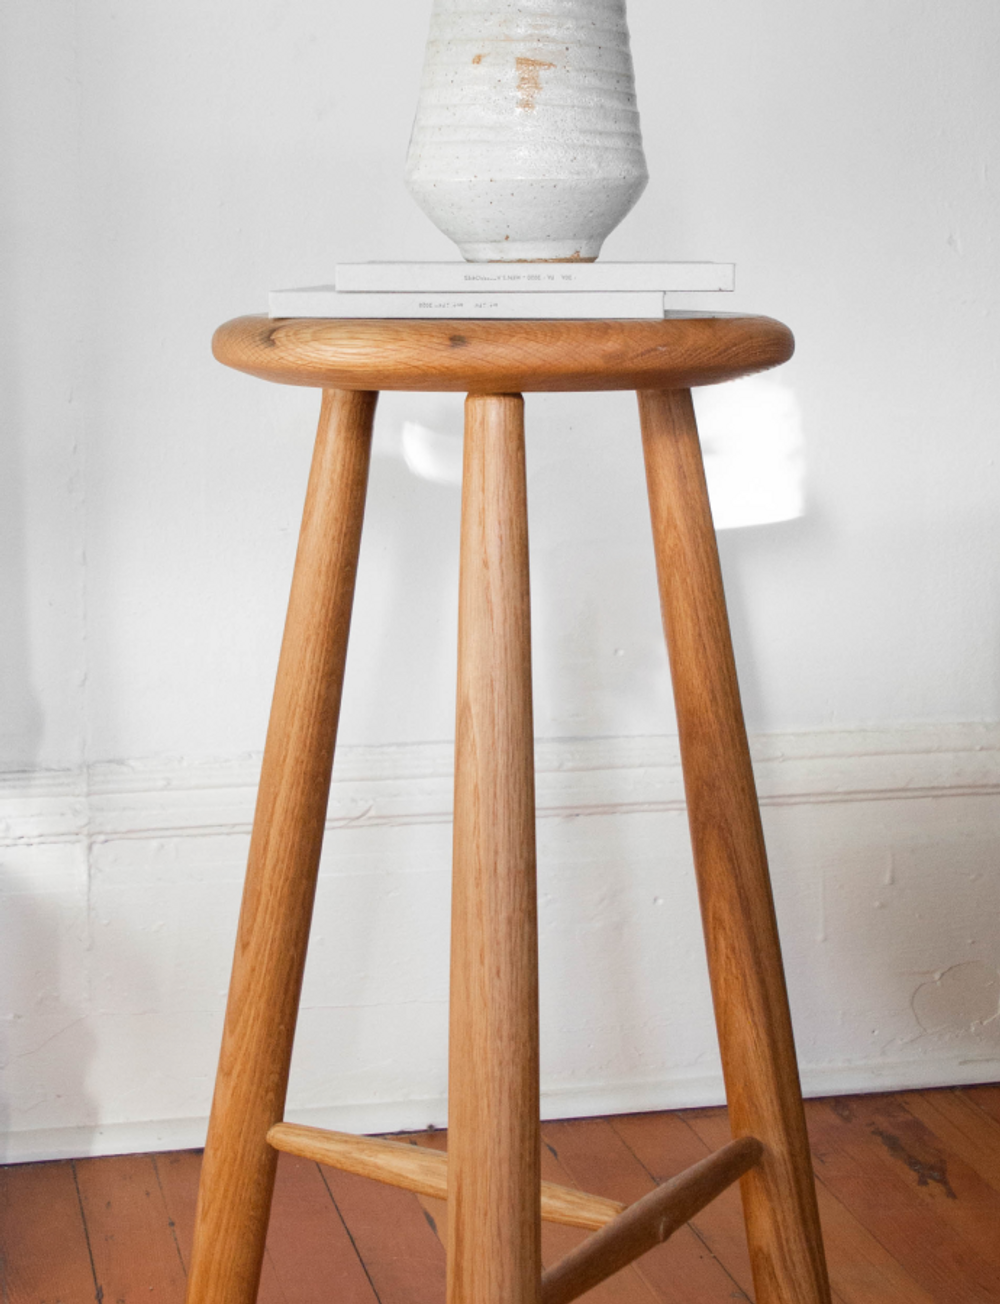 Stool on white background with wood floor